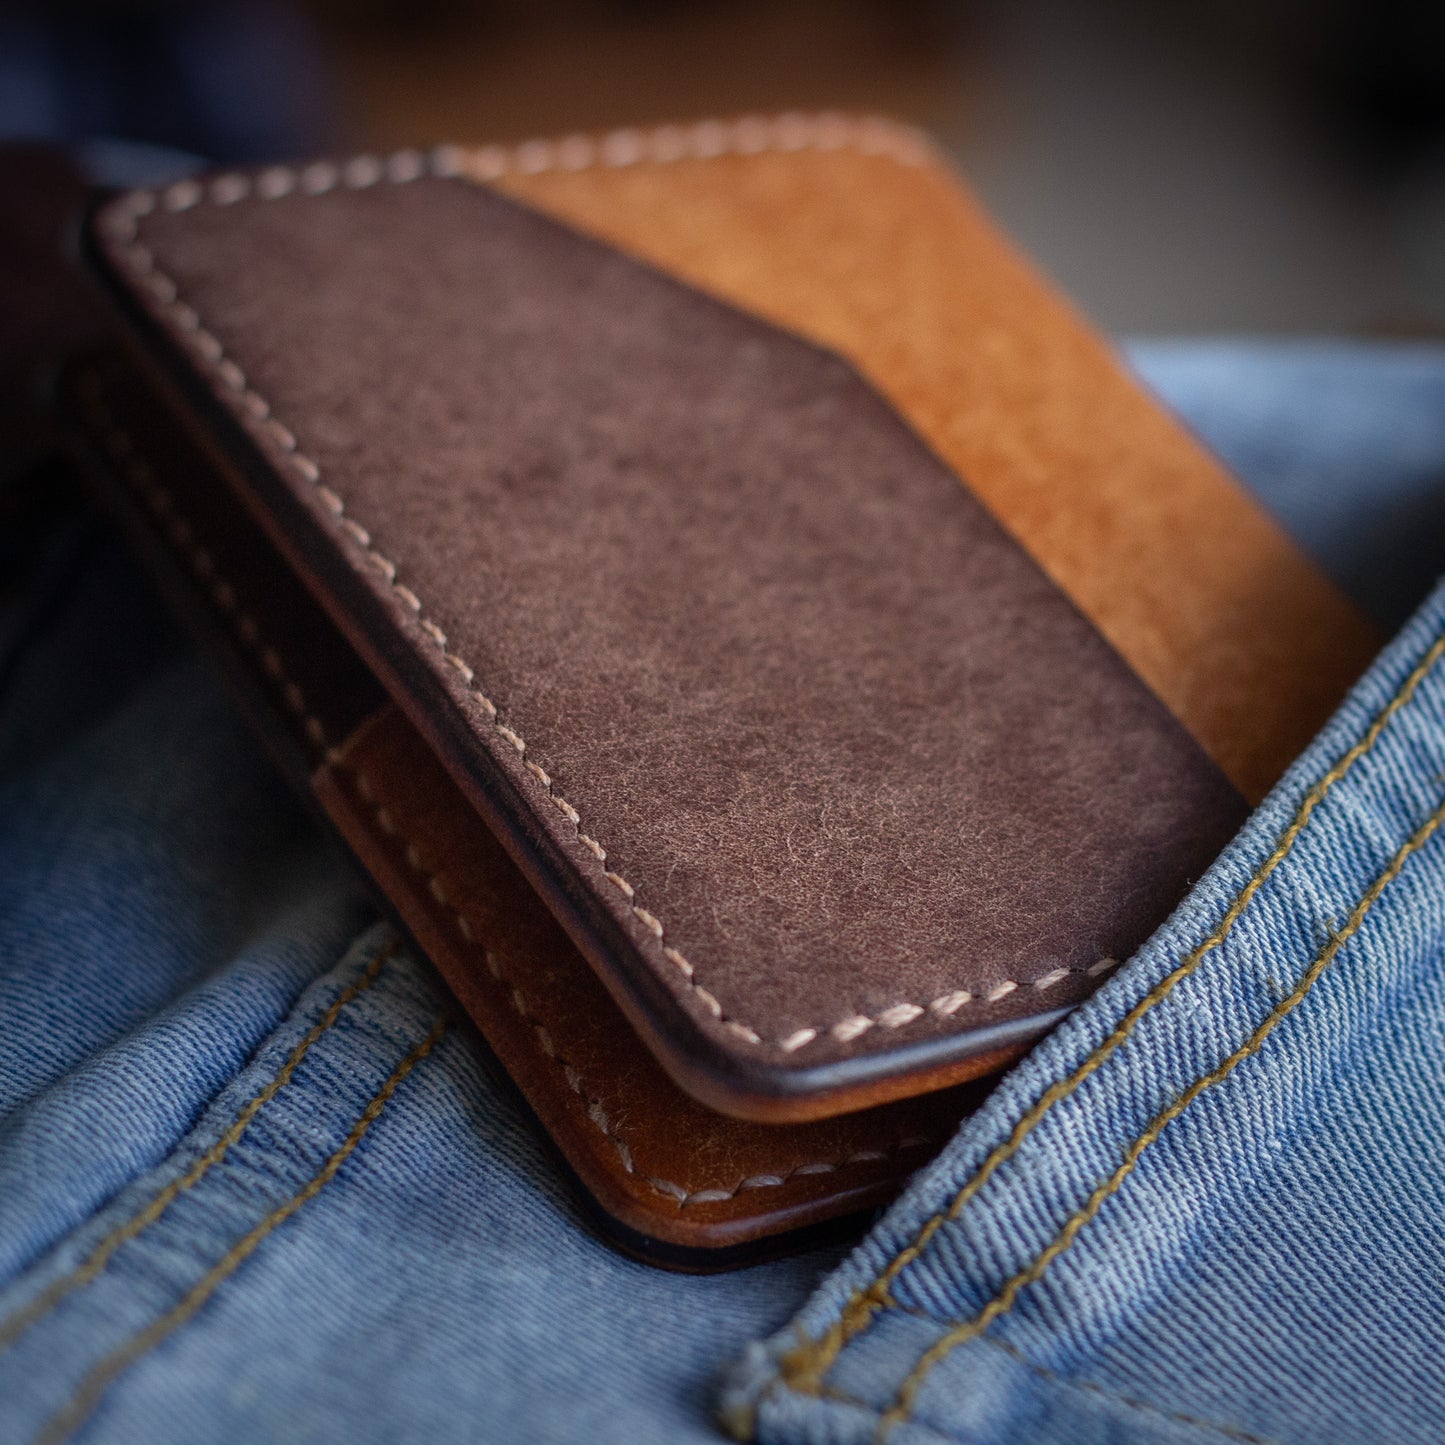 The cred brown bifold handmade leather wallet on top of blue jean pocket reverse quick access pocket